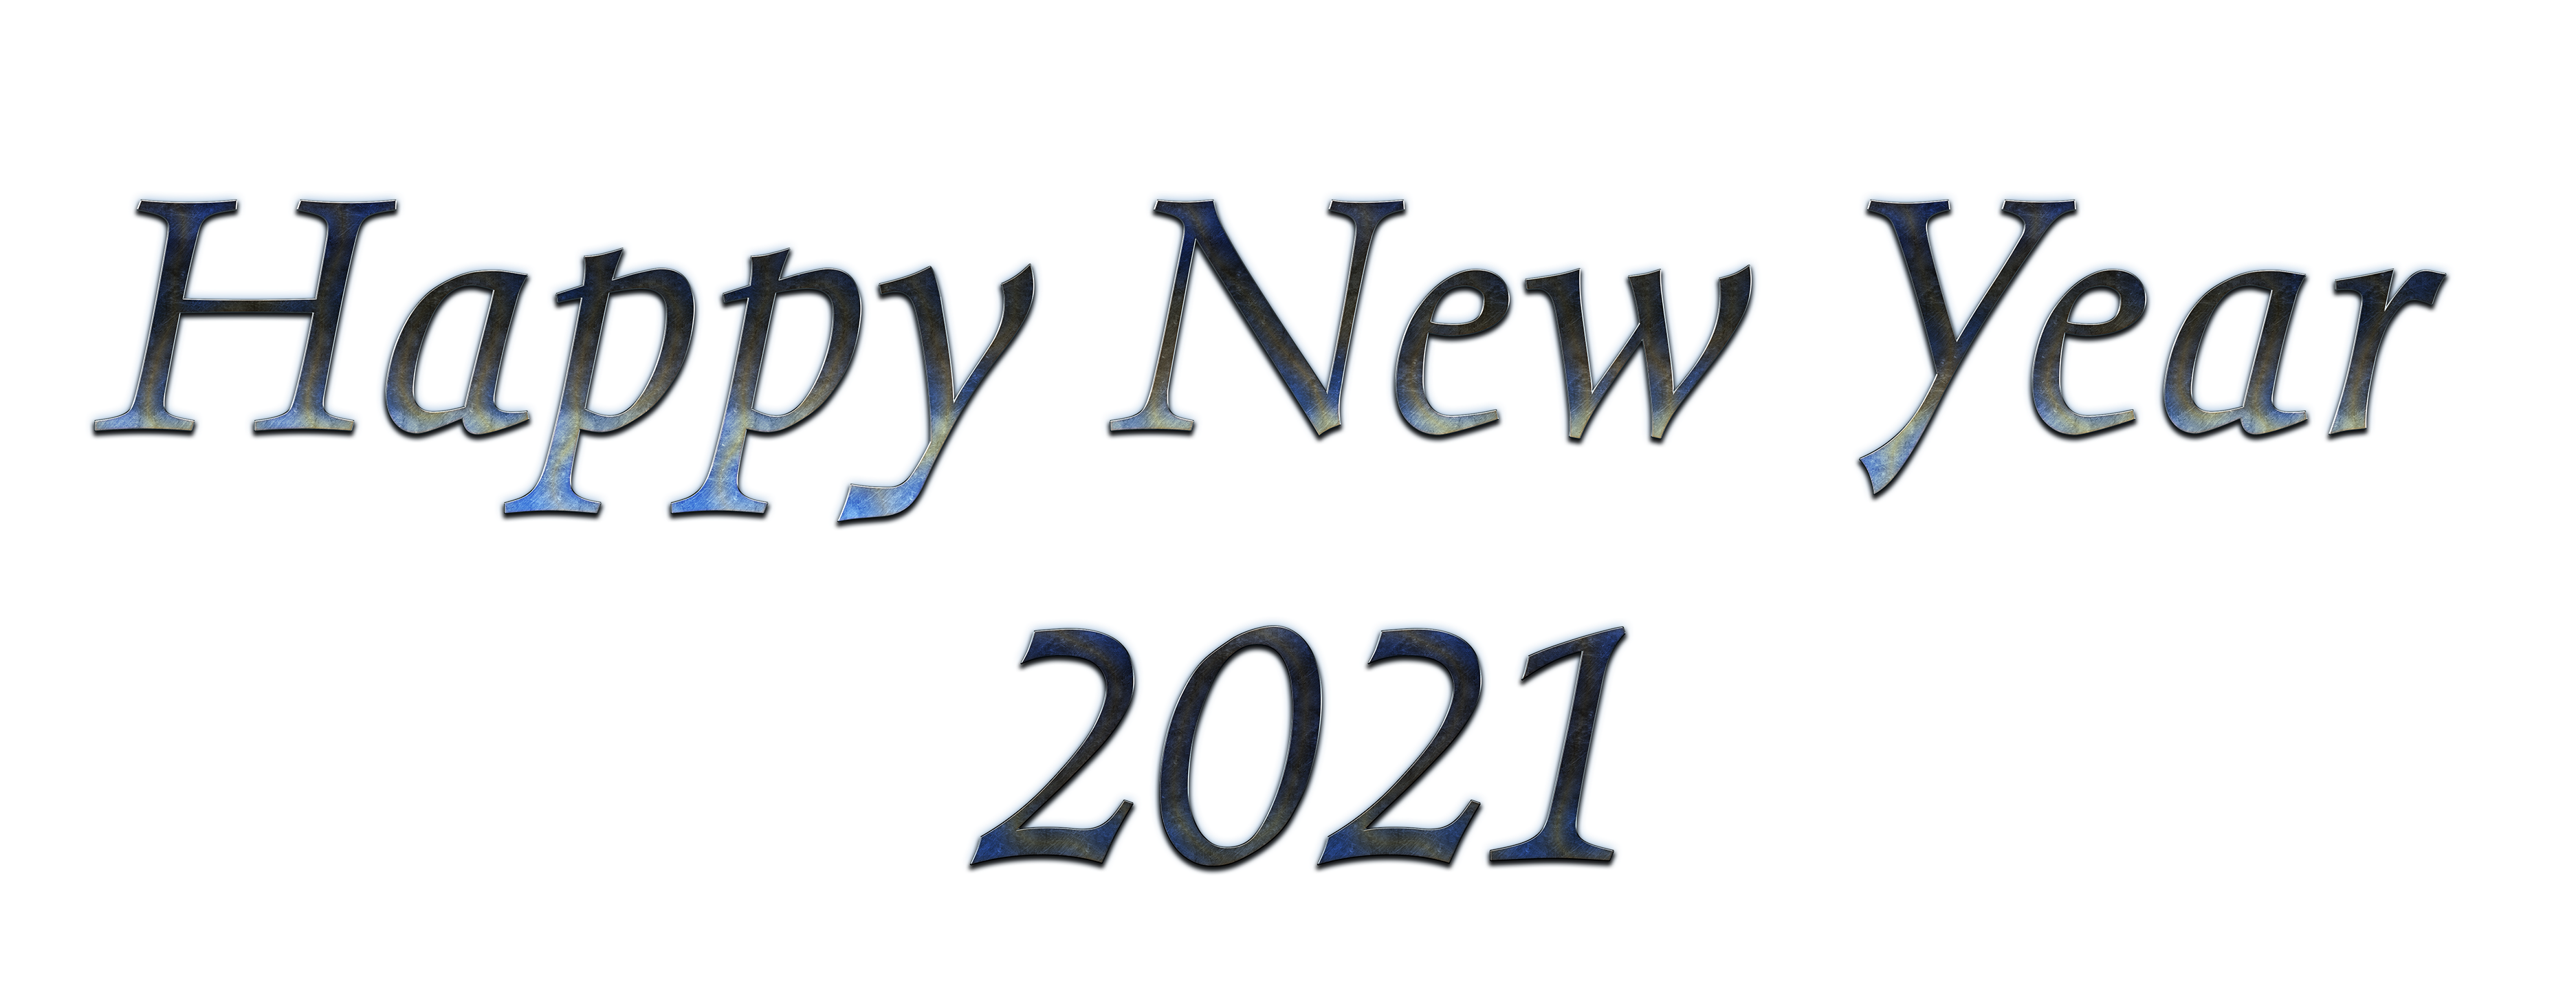 Year 2021 Happy Free Transparent Image HQ PNG Image